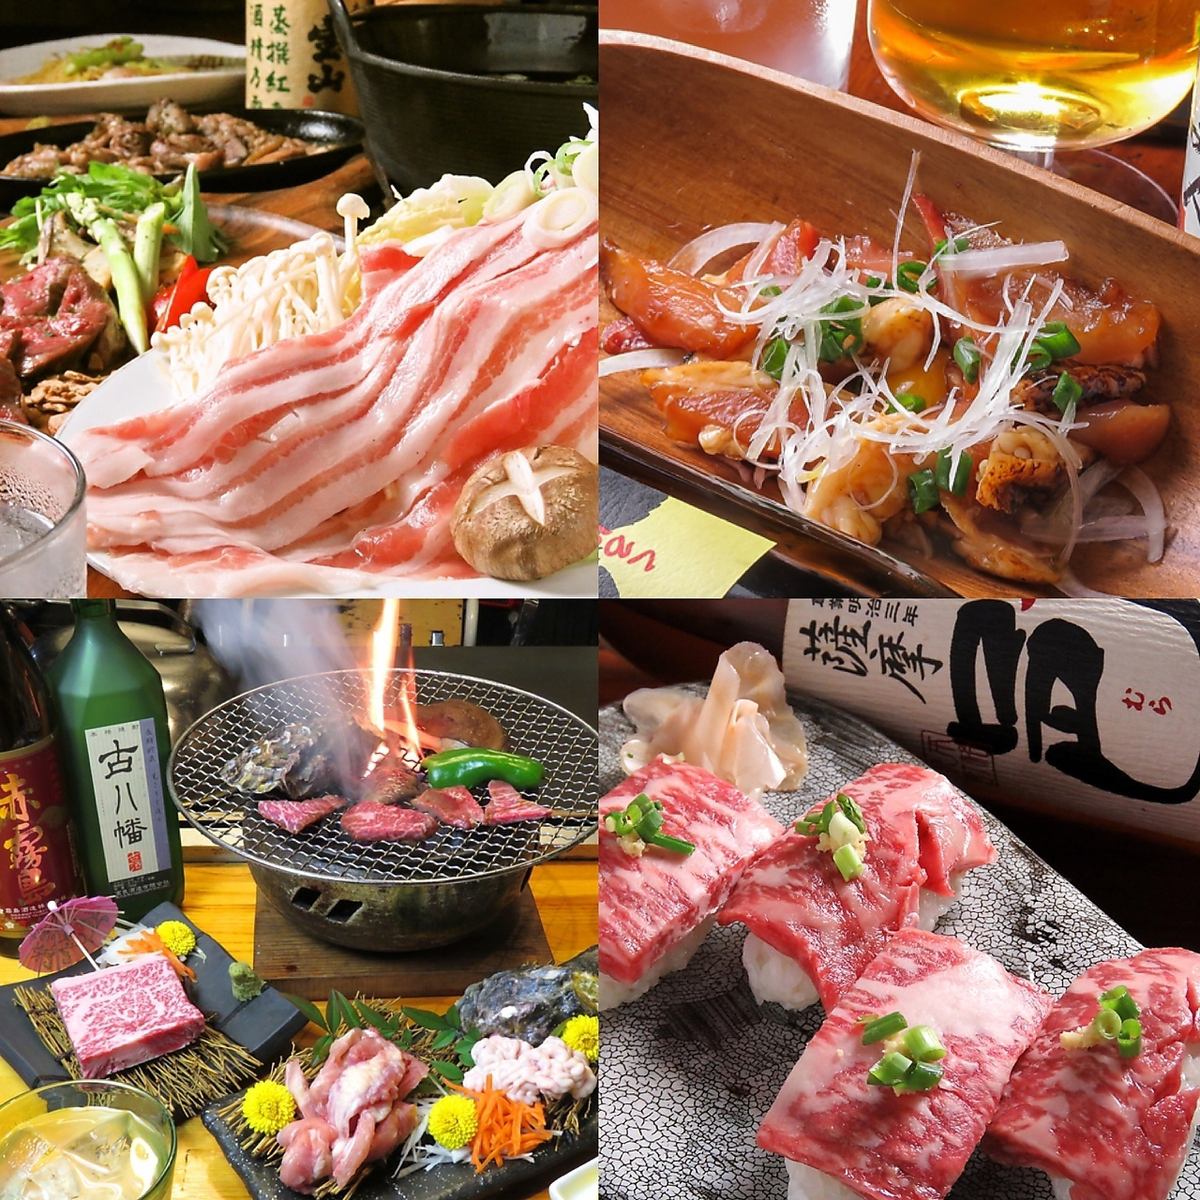 Filled with delicious seasonal dishes! The 2-hour [all-you-can-drink] steak course is also popular. Perfect for small parties and girls' gatherings.